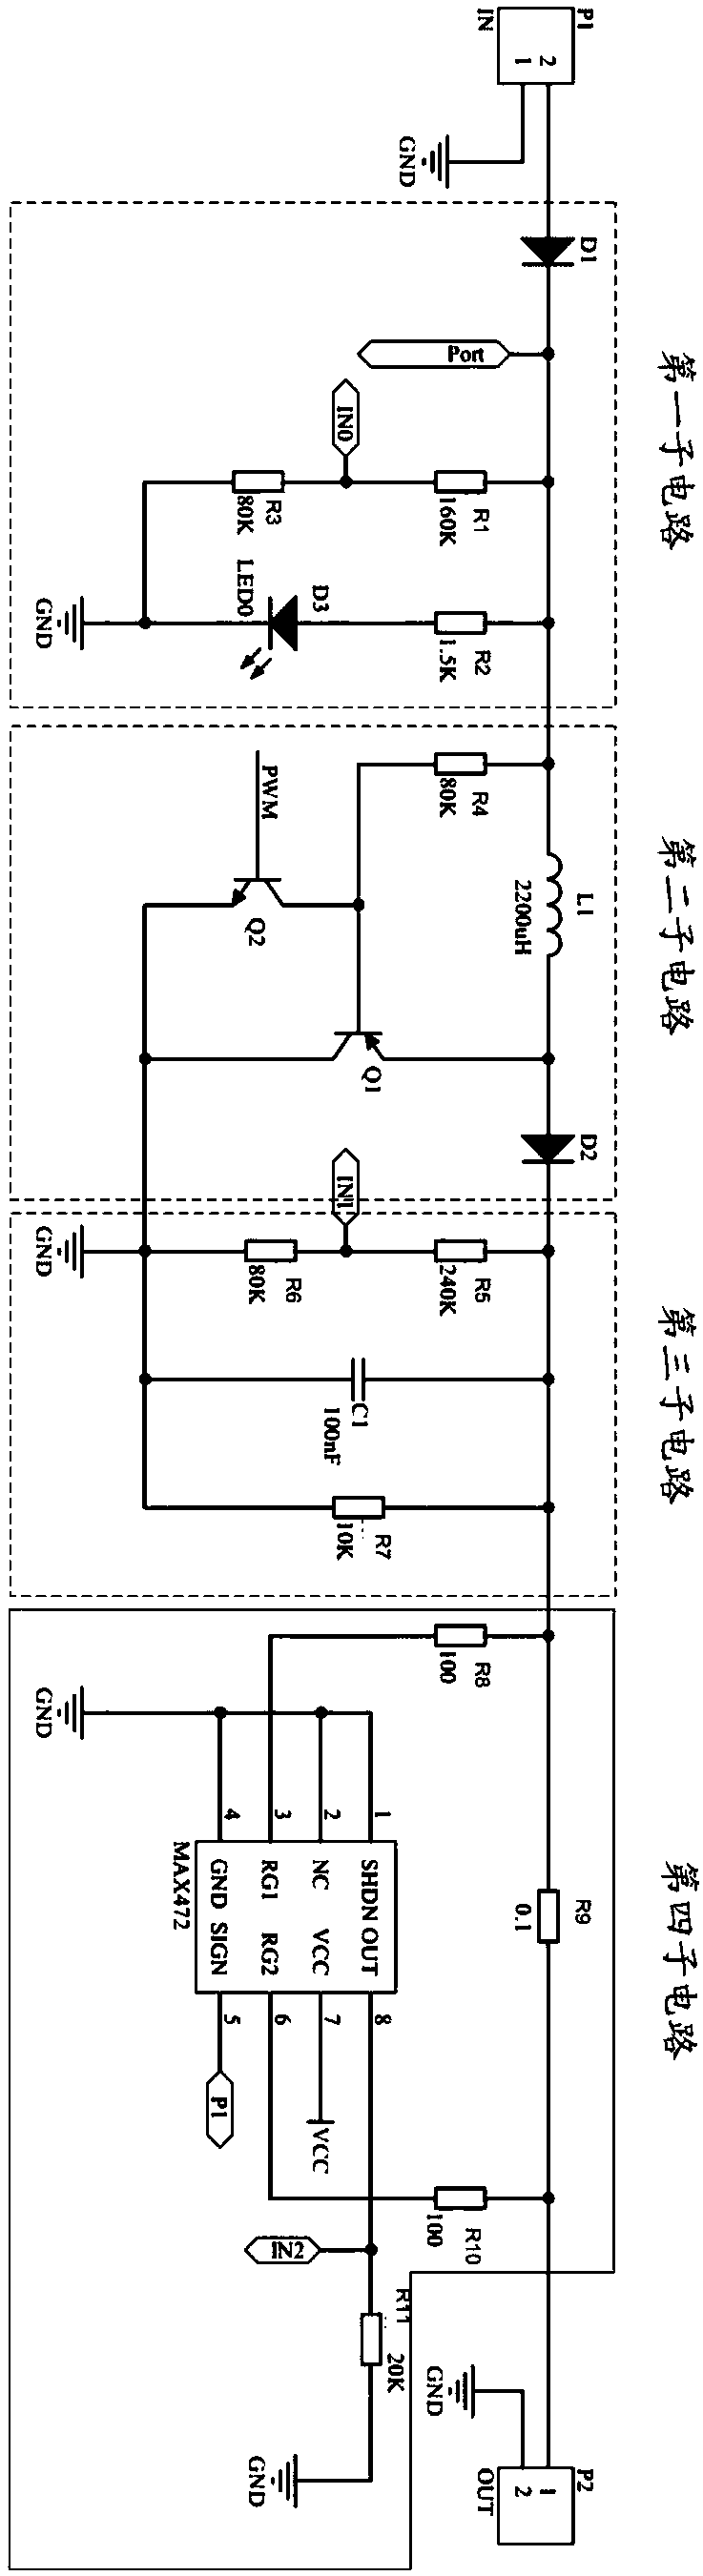 Power supply system based on heat-electric cell